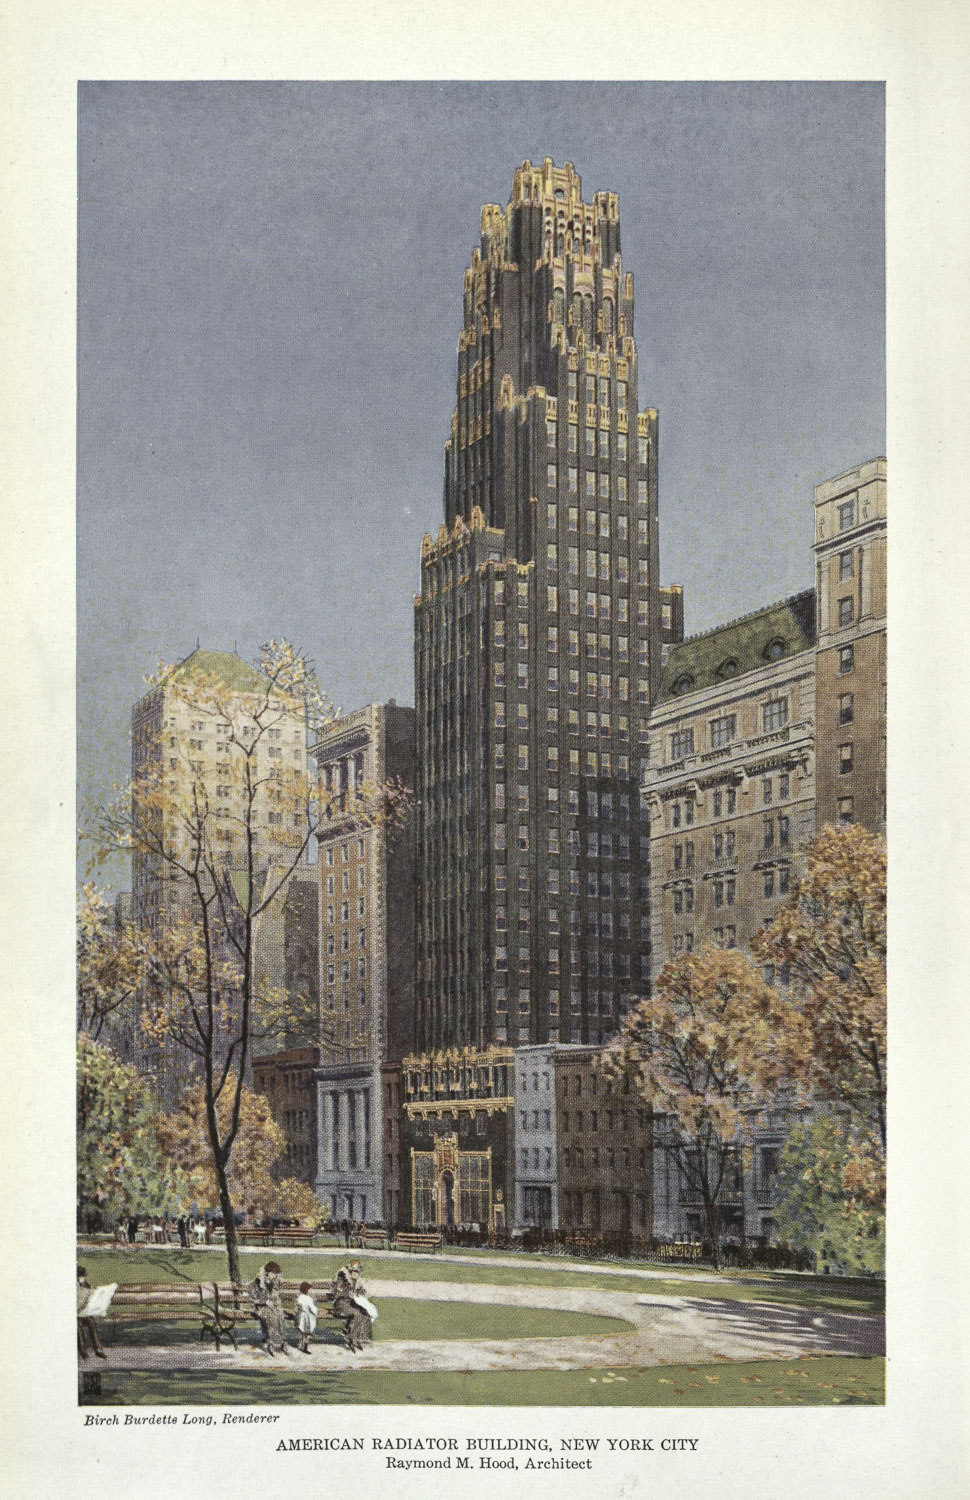 A color print of a black skyscraper with gold accents. The gold accents highlight areas of the top of the building. Gold accents also highlight the lower stories of the building. The first story is faced with a large shop window bordered by a gold frame. In the foreground is a park with a sweeping path and autumn trees, the yellow-orange of the leaves matching the golden highlights on the skyscraper.